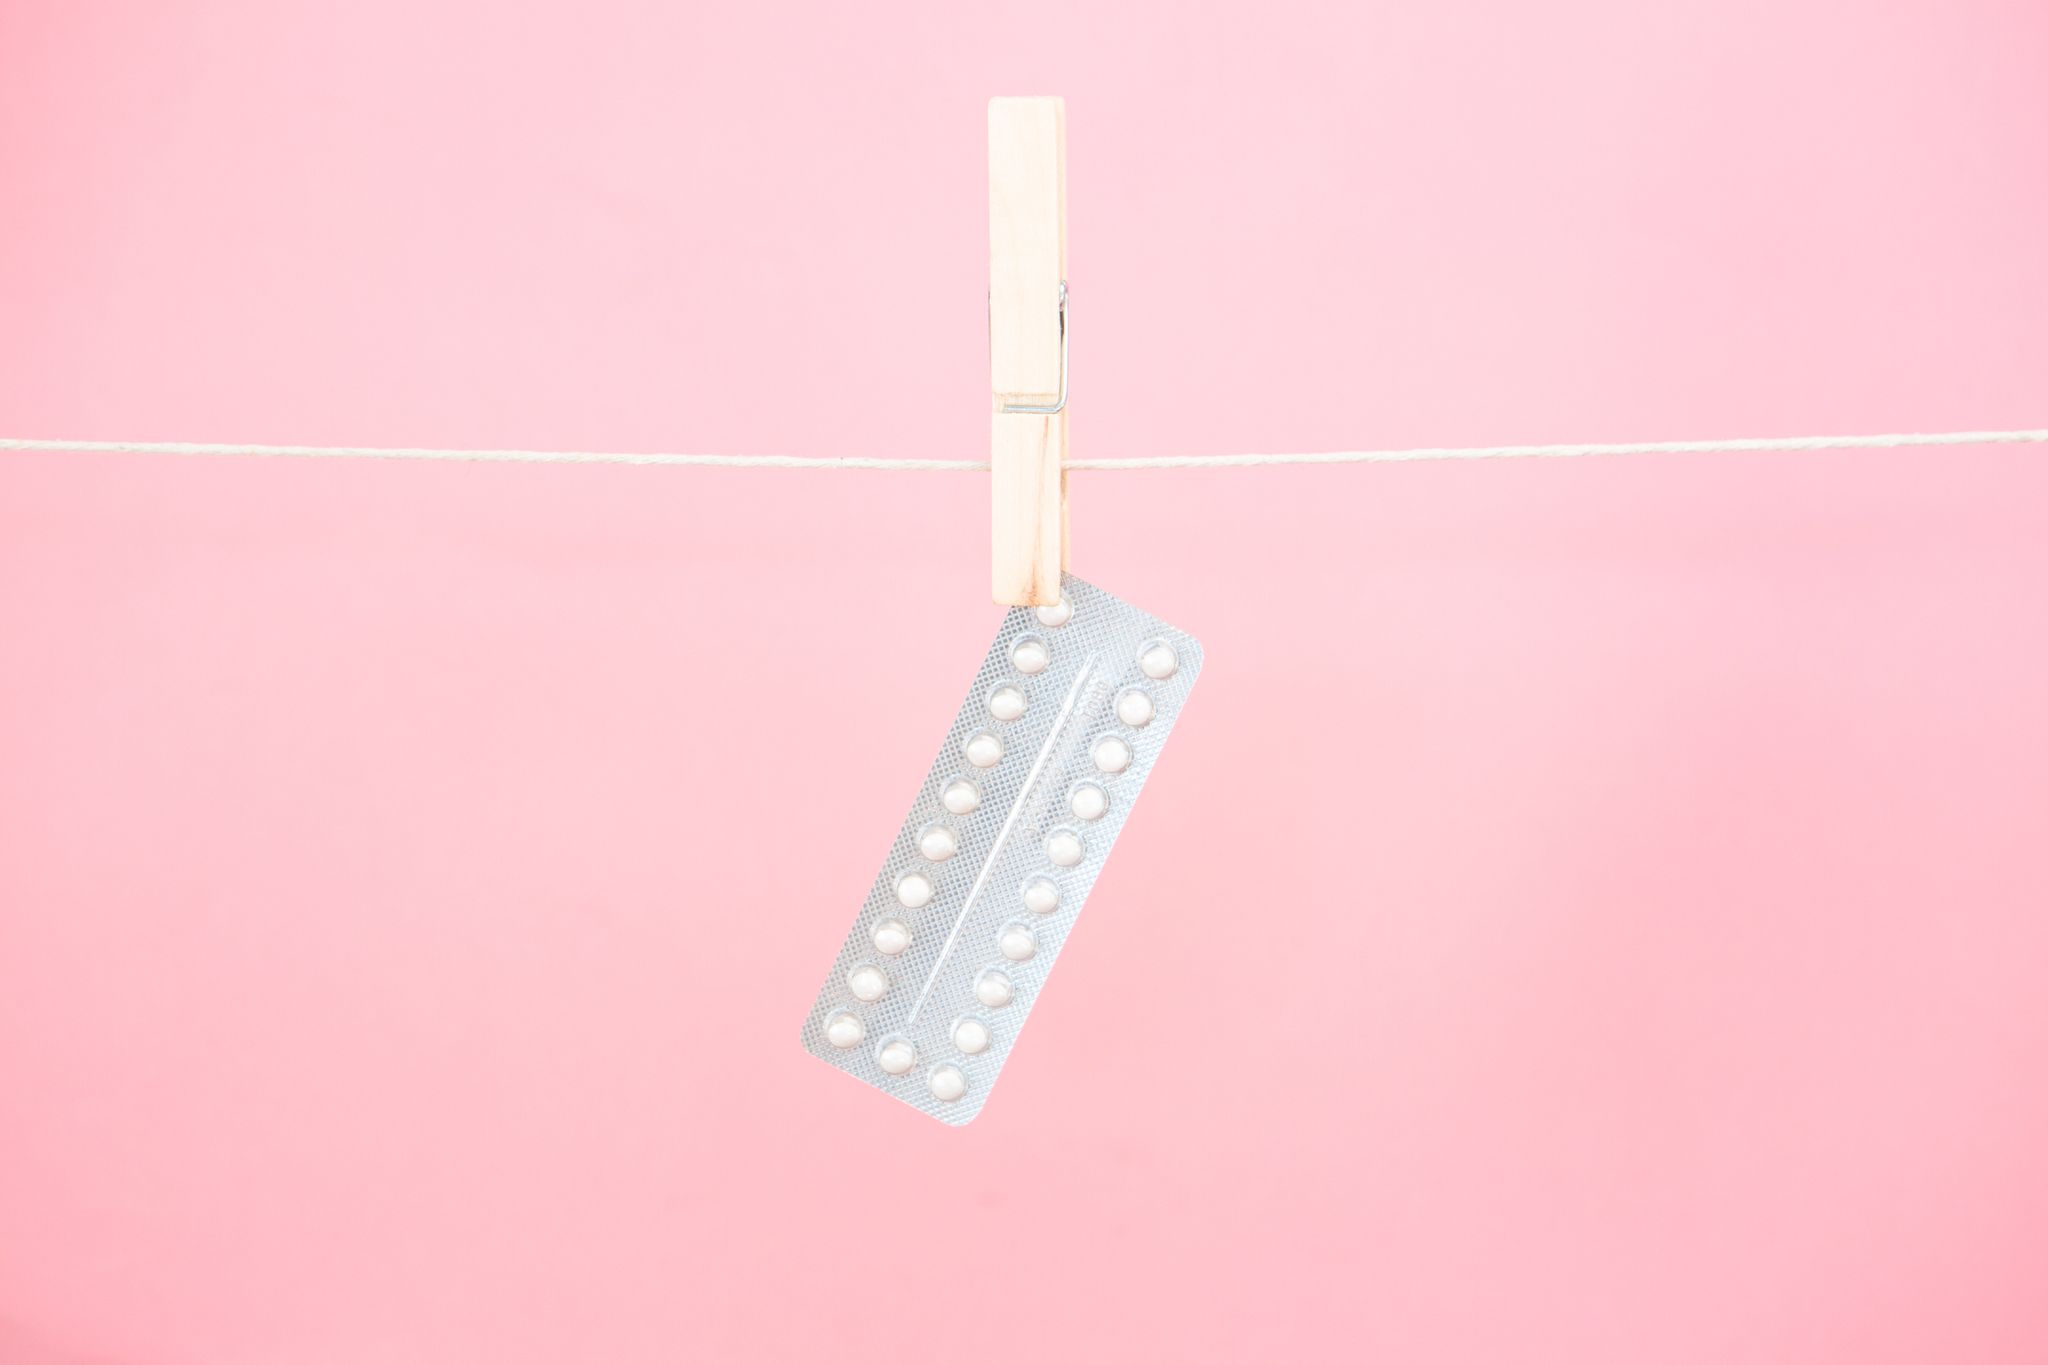 Contraceptive pill blister pack hanging from line